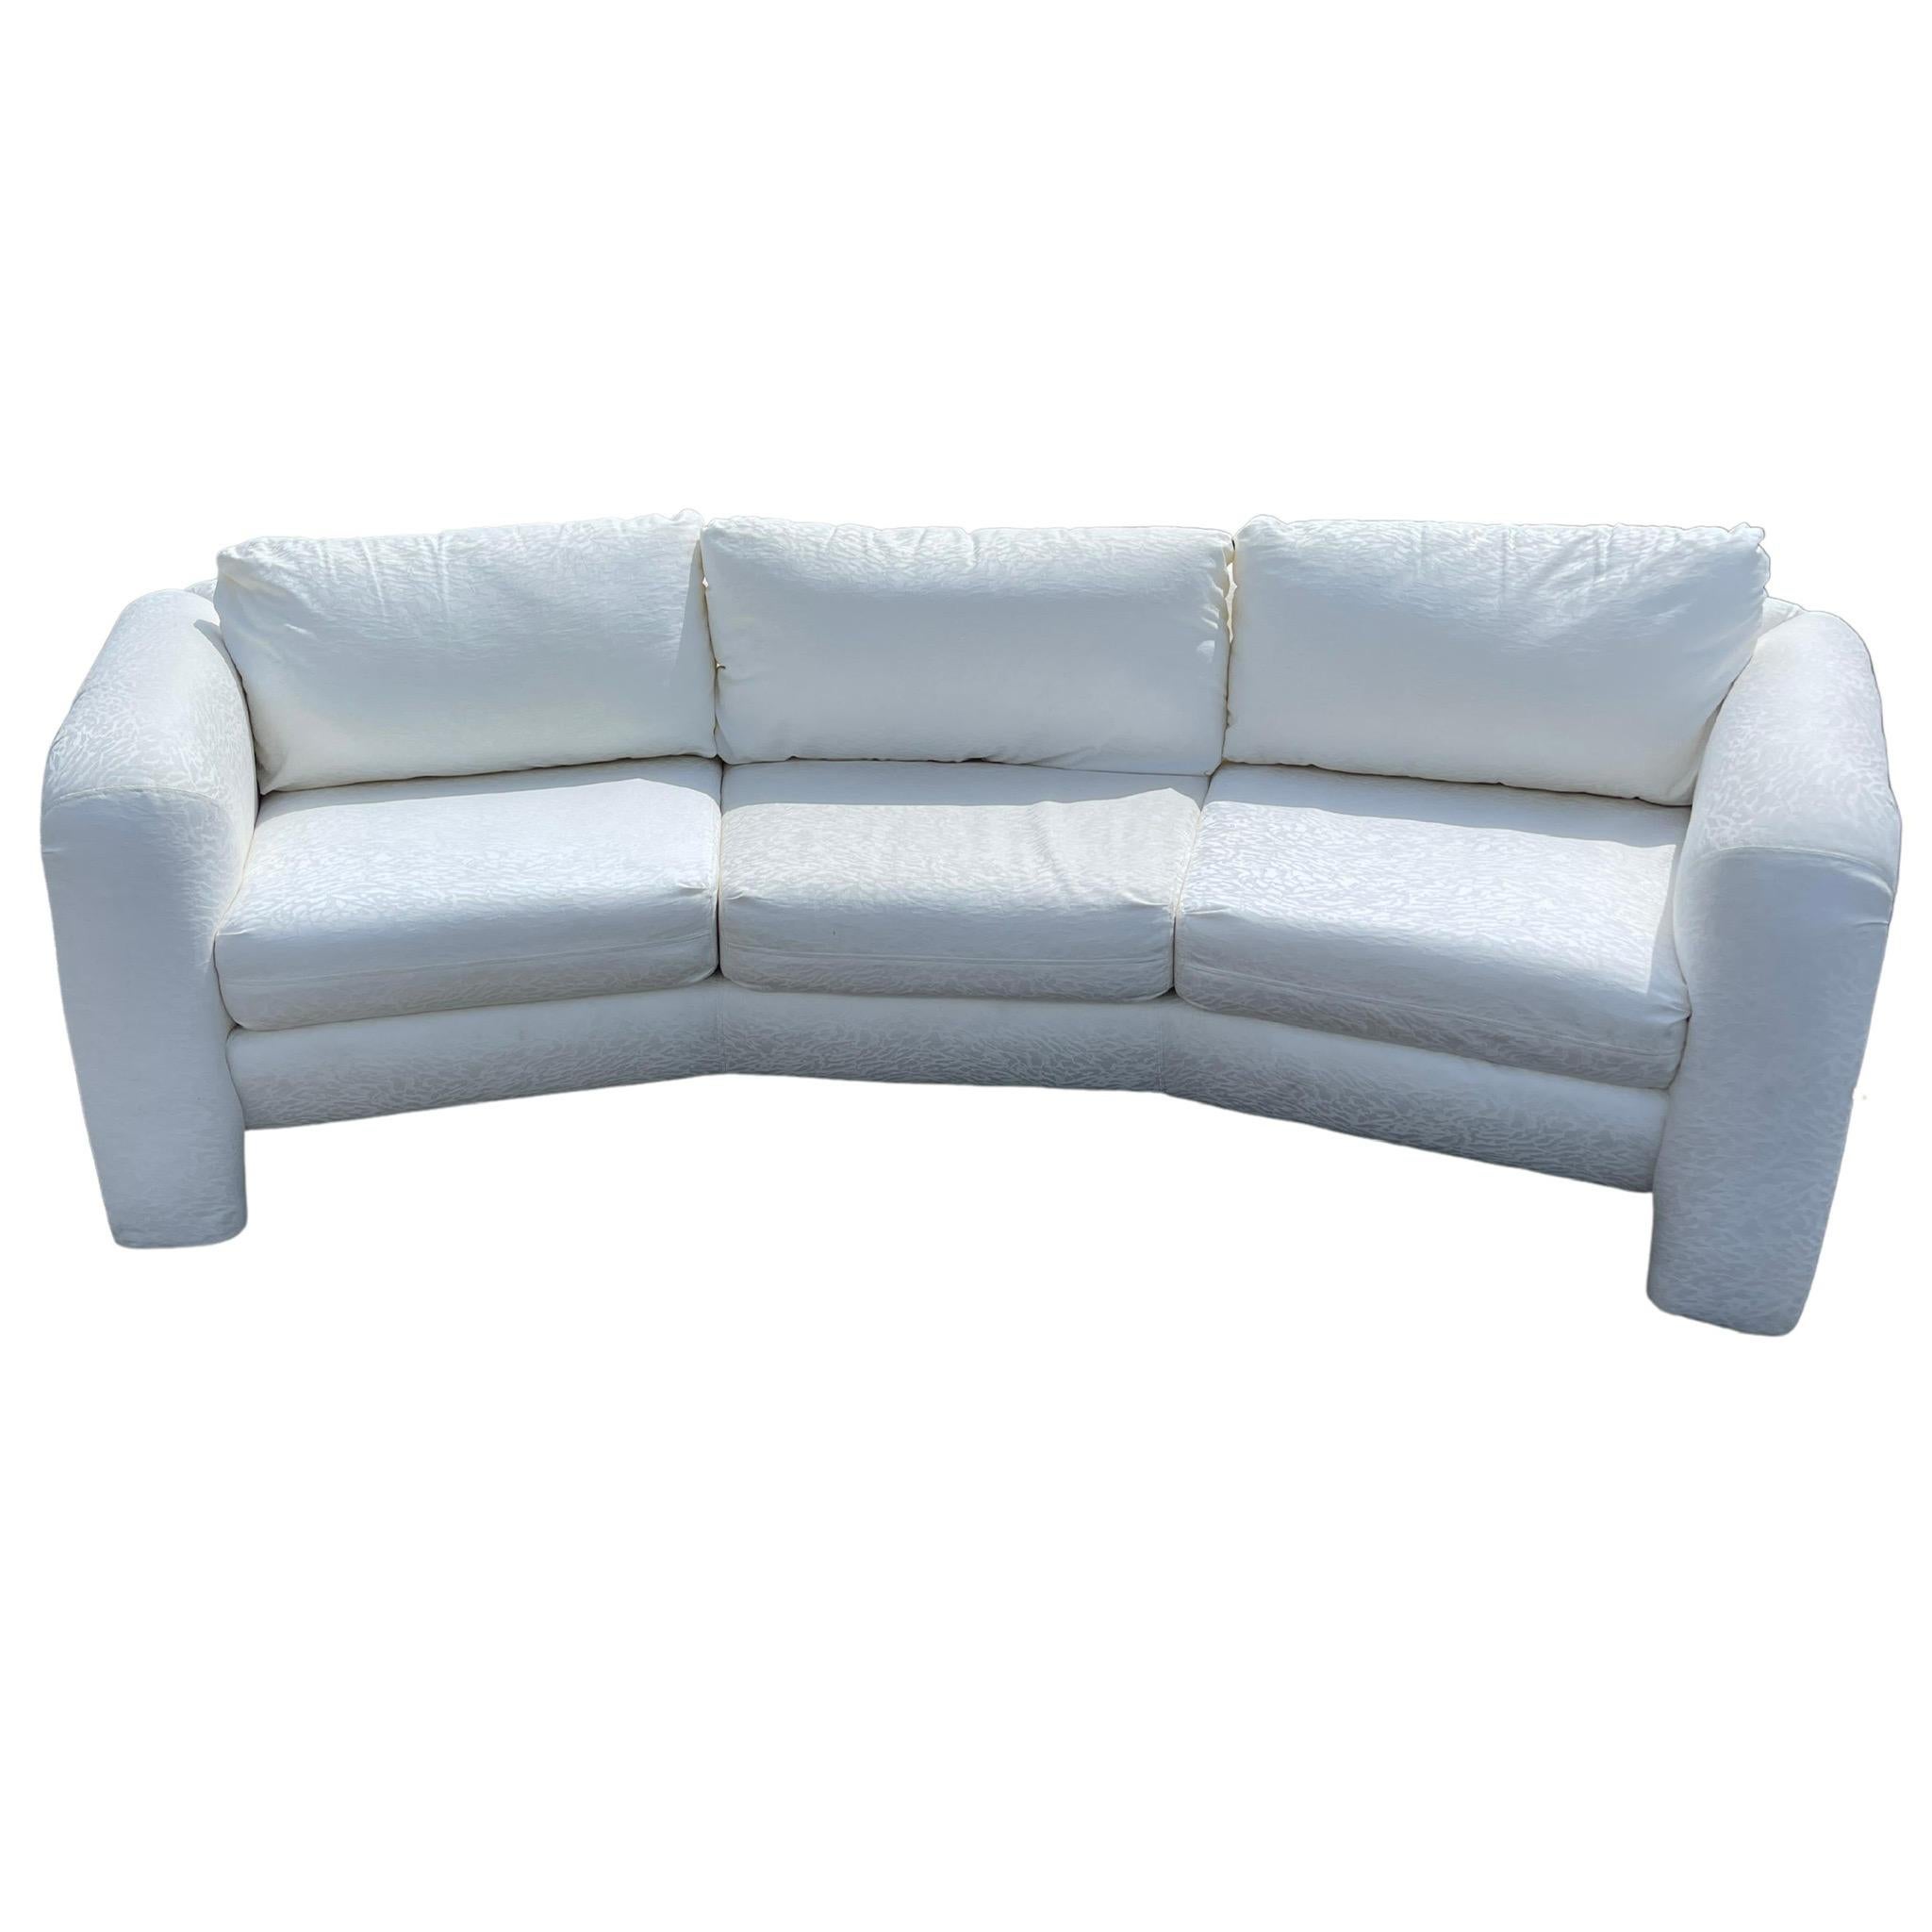 Amazing pair of sculpted sofas by Carson’s. Each feature a white fabric with three seat cushions and back cushions.

Additional information:
Material: Fabric
Color: White
Style: Postmodern
Brand: Carsons
Time Period: 1990s
Place of origin: